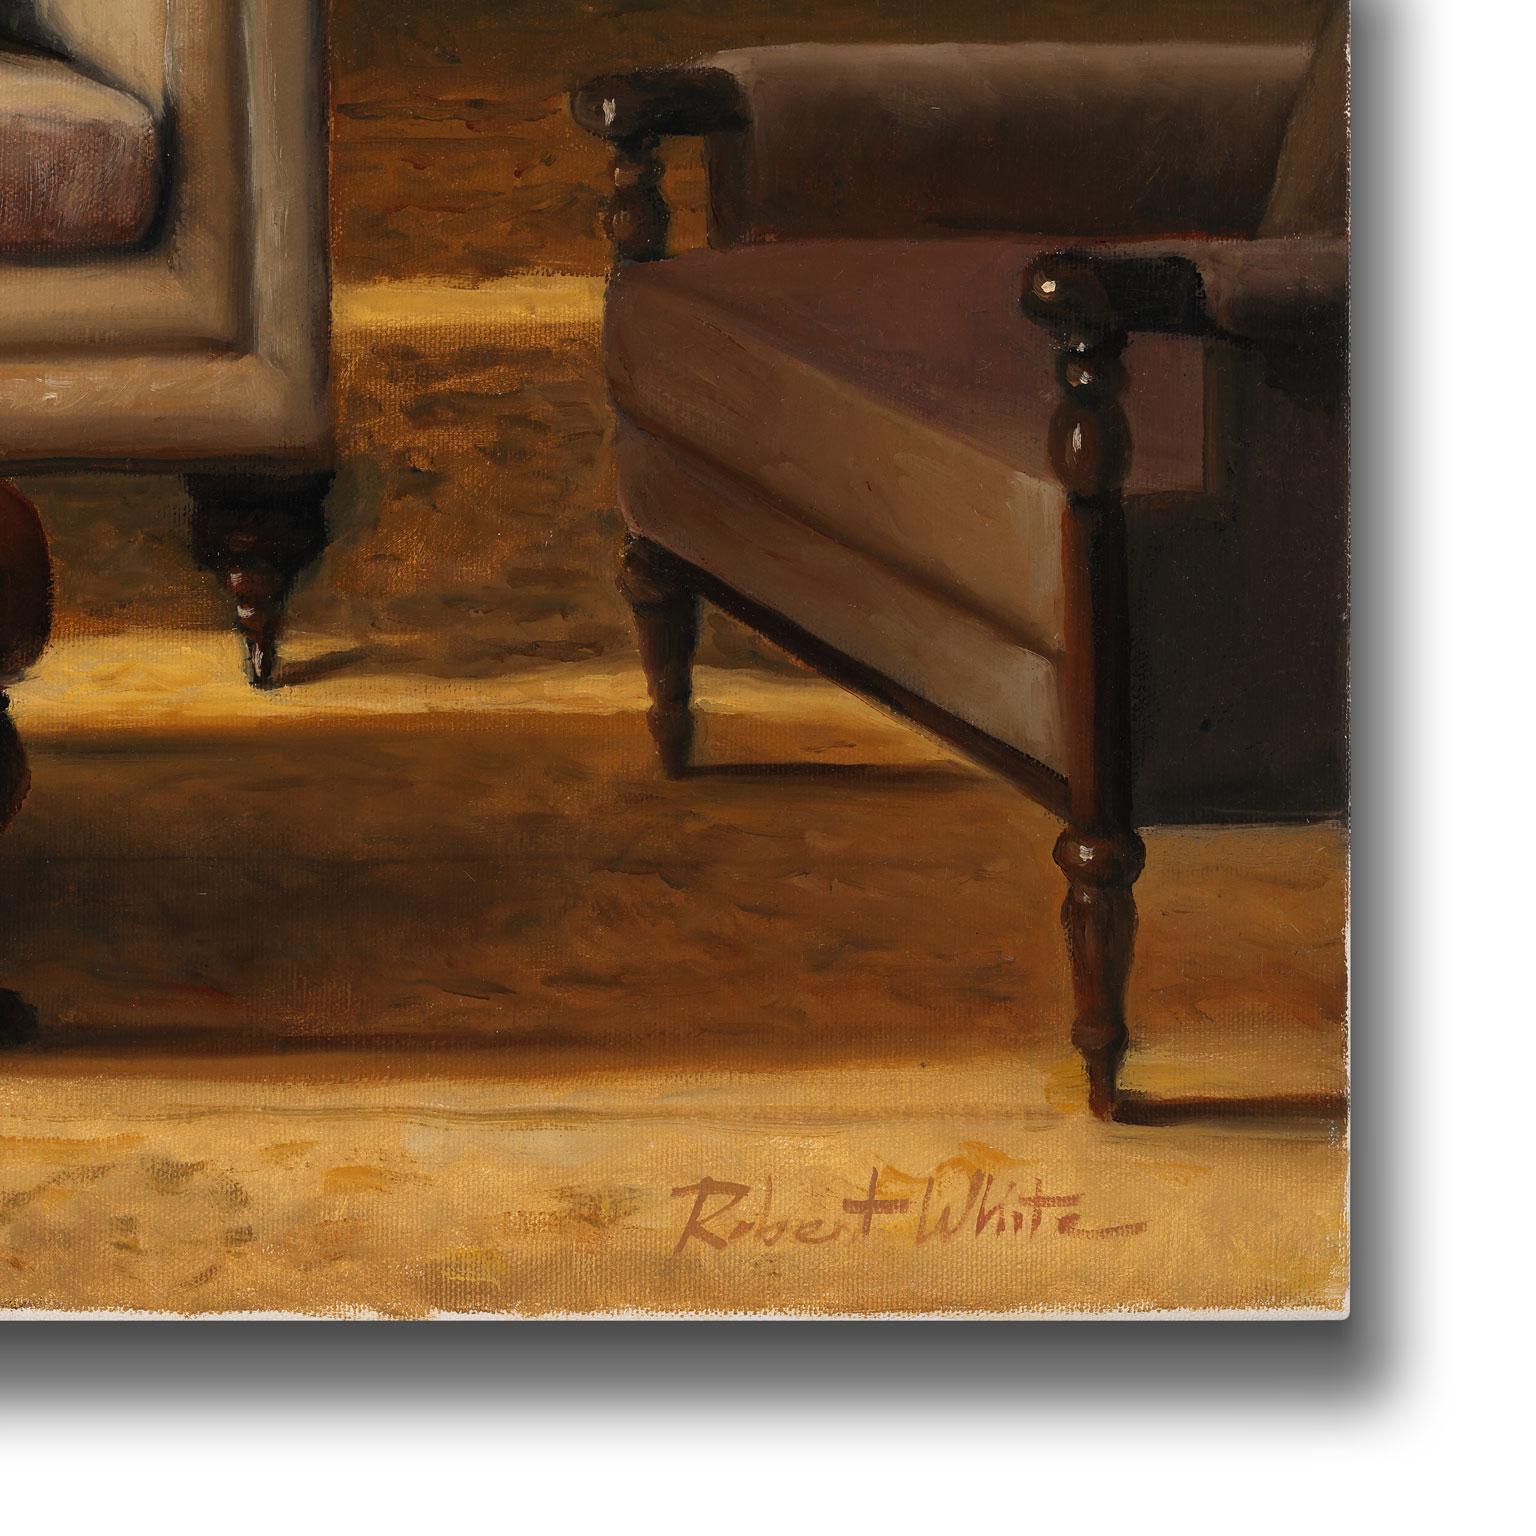 “Cheetah For Tea,” an original oil on canvas by Robert K. White, is a piece for the true collector. White’s careful attention to detail and vivid use of browns and grays project from the painting, immediately capturing the viewer's attention and